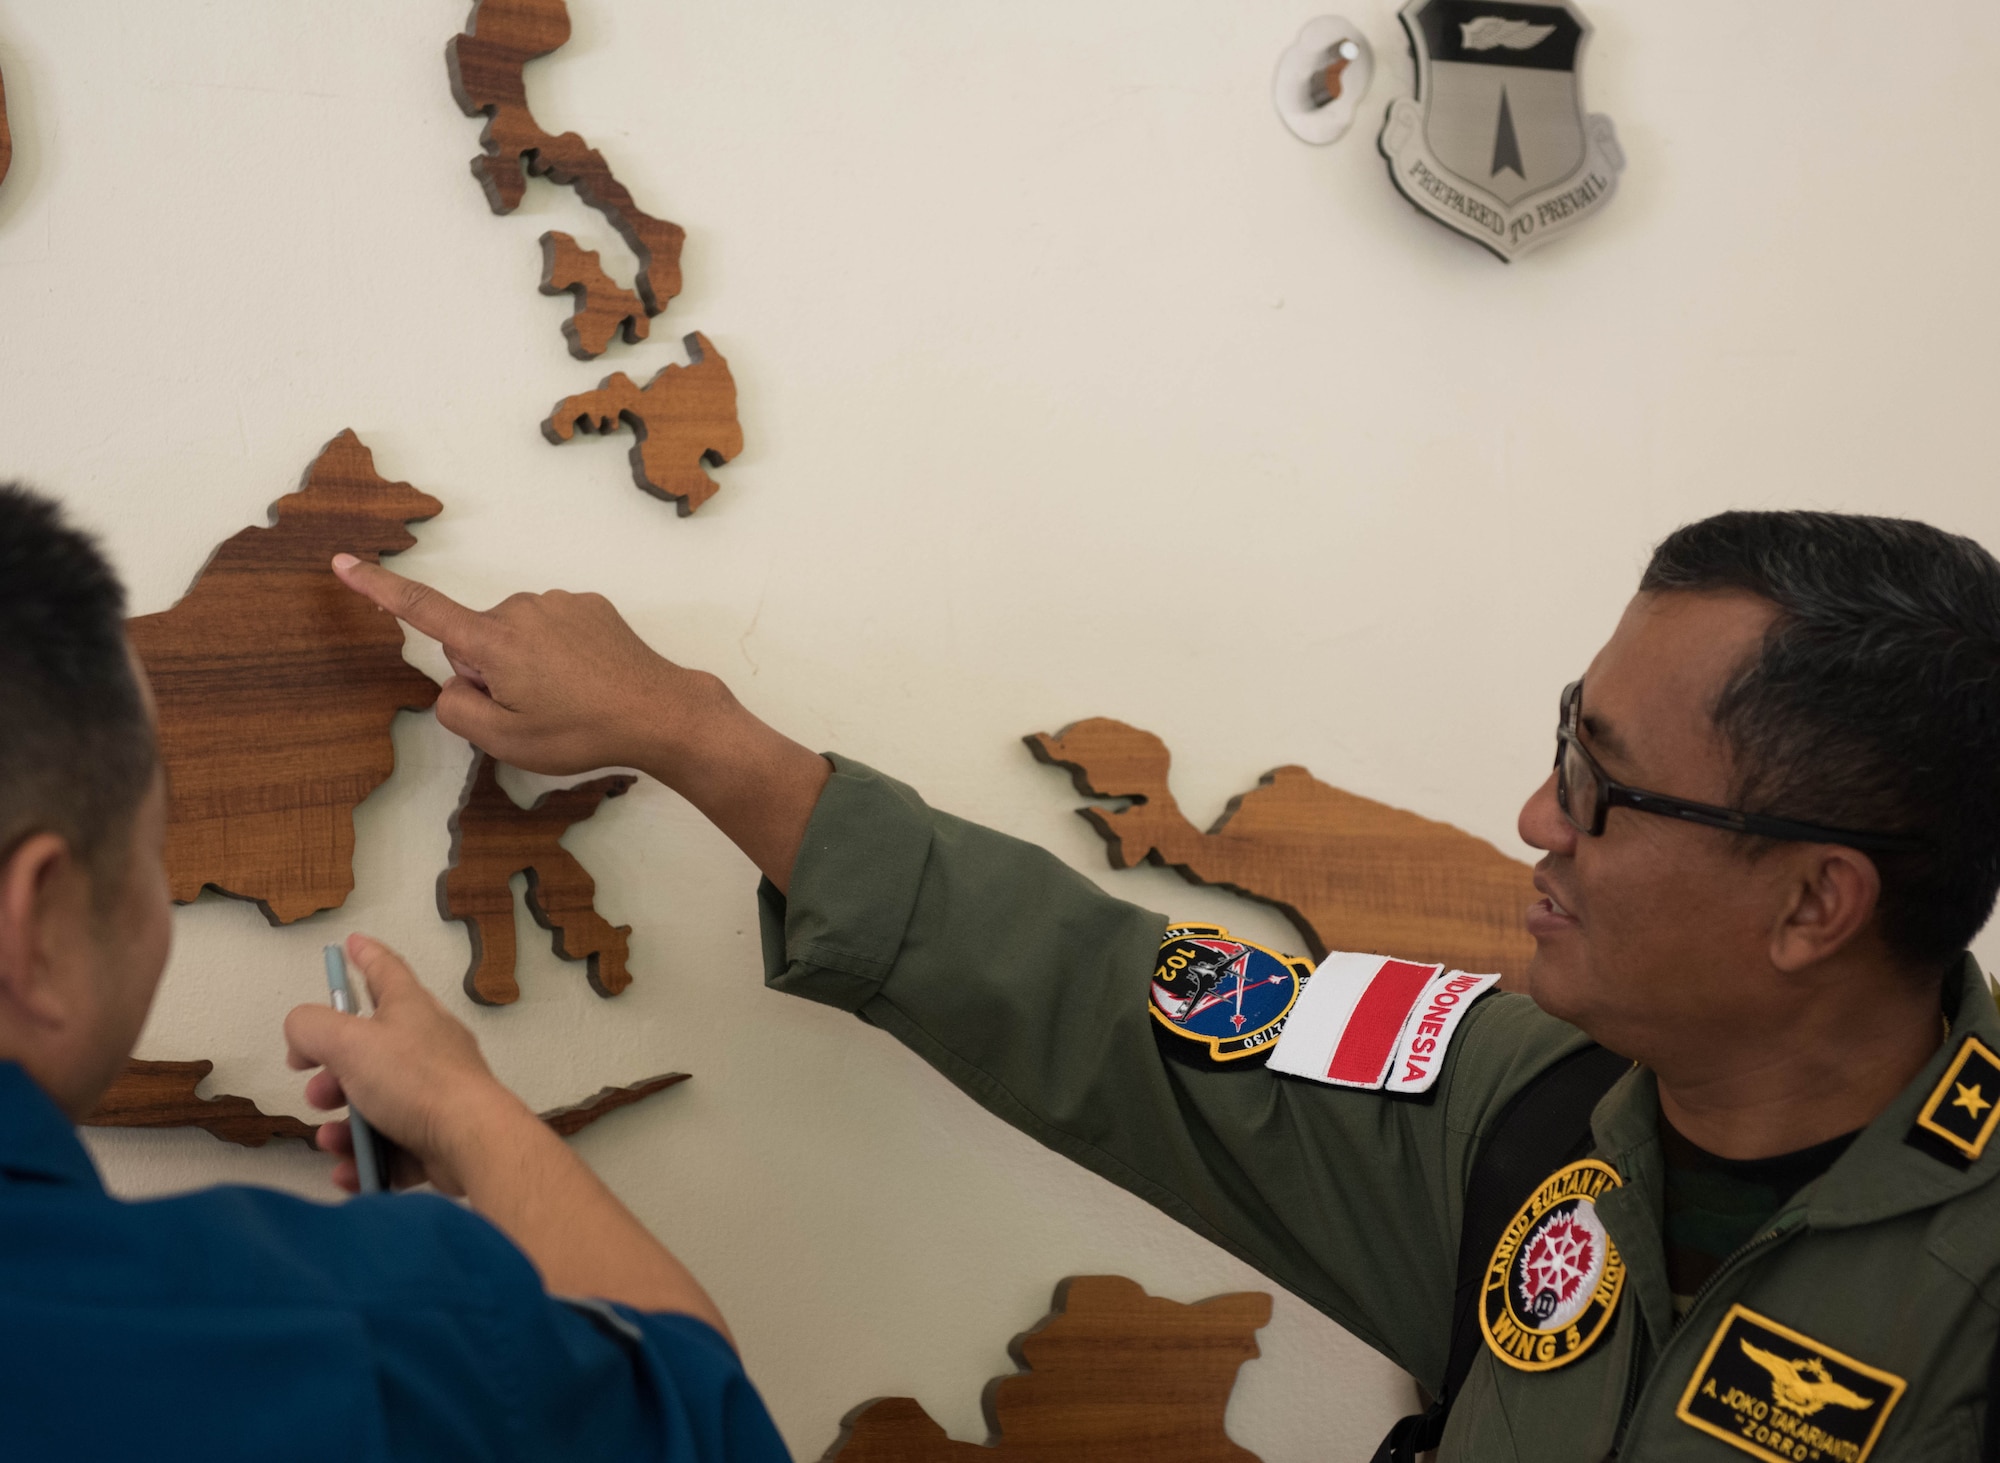 Indonesian air force Air First Marshal Alfonsius Takarianto points to his town on a giant map at Headquarters Pacific Air Forces (PACAF) after a briefing during a tour of Joint Base Pearl Harbor-Hickam, Hawaii, Oct. 23, 2018.